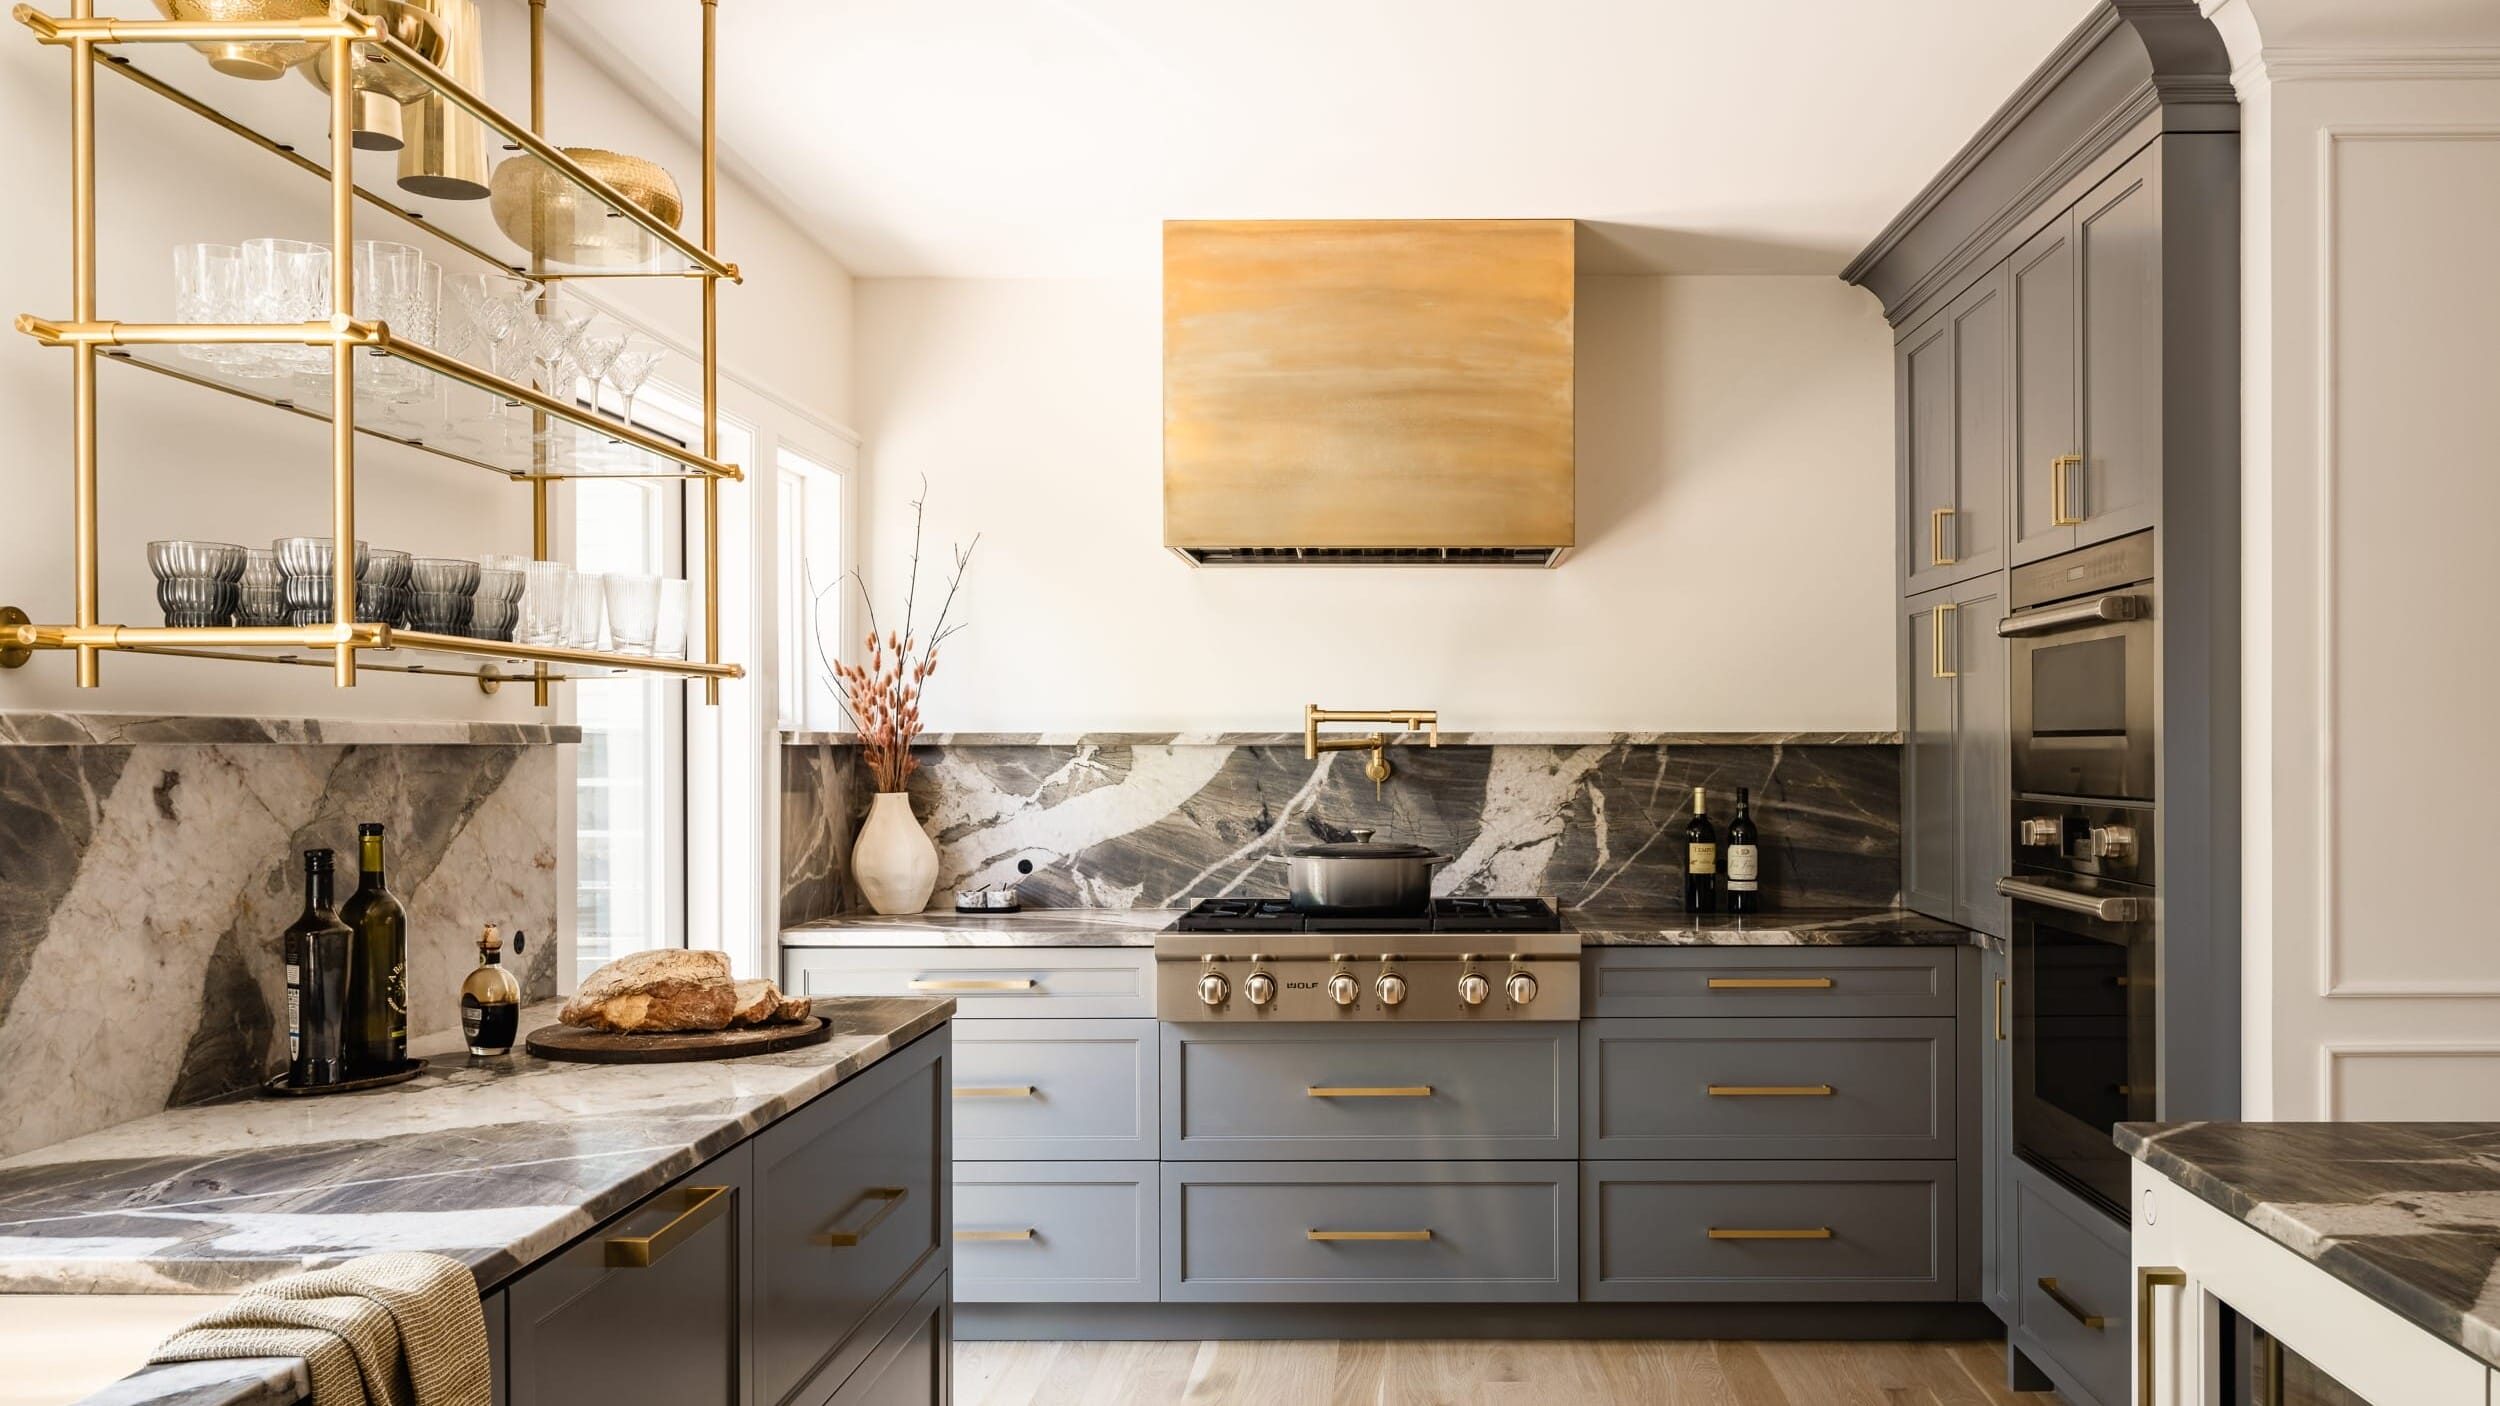 A gray and gold kitchen with marble counter tops.